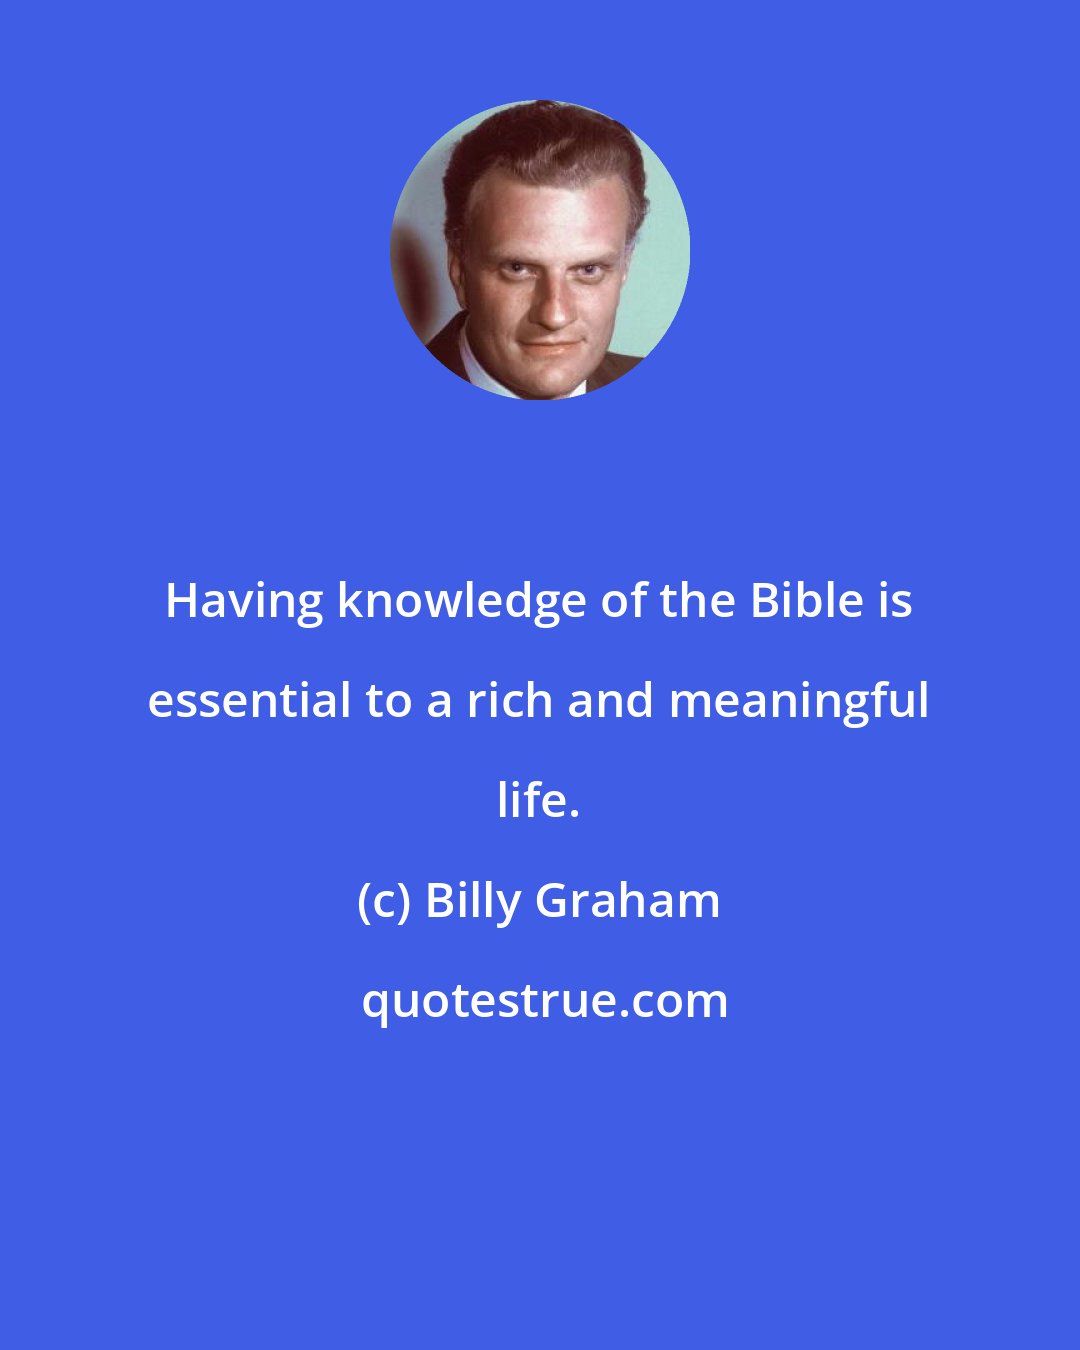 Billy Graham: Having knowledge of the Bible is essential to a rich and meaningful life.